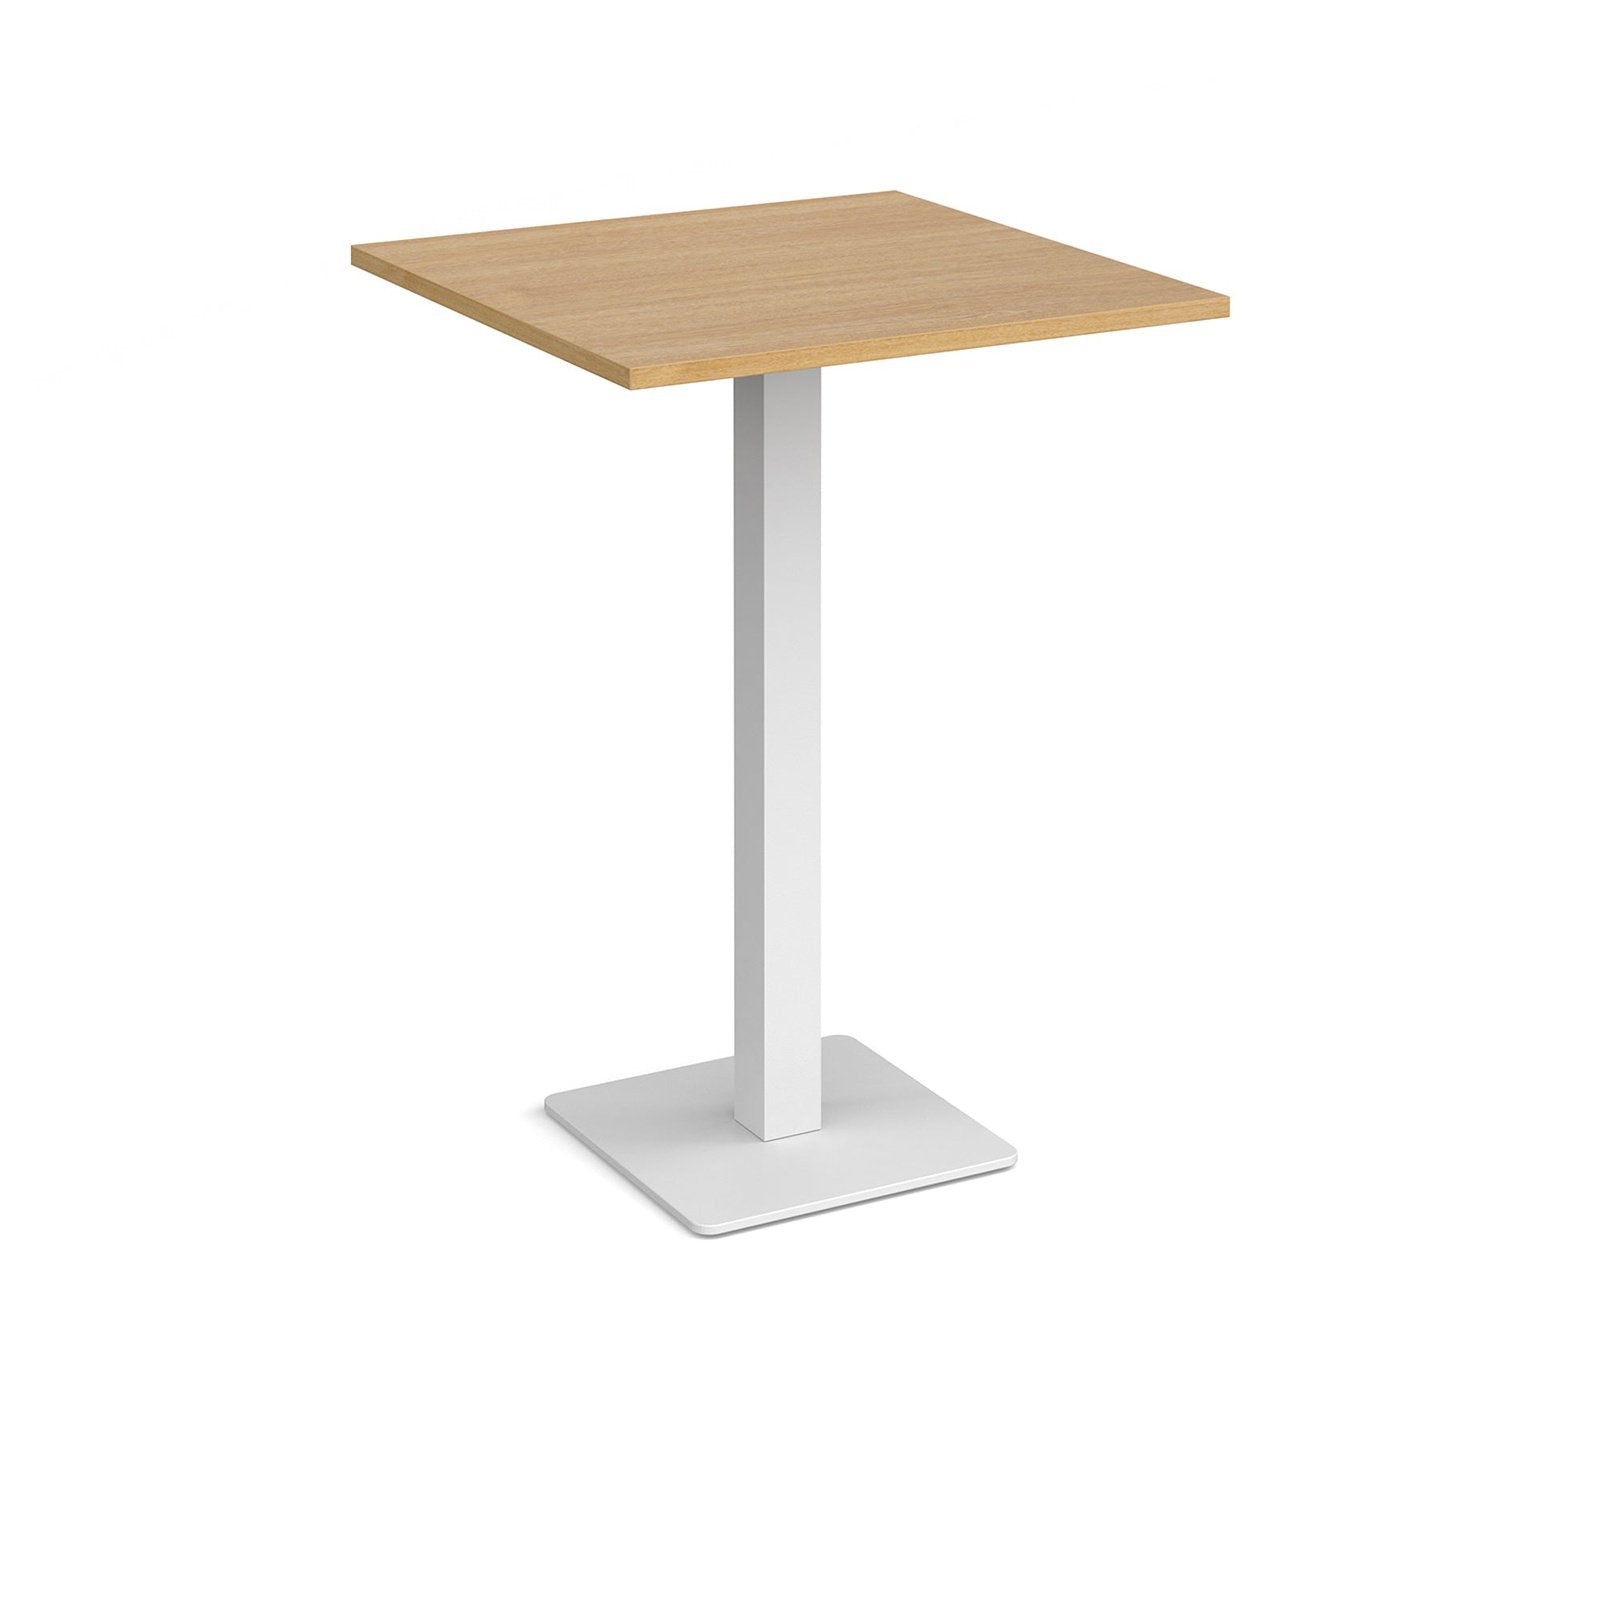 Brescia square poseur table - Office Products Online